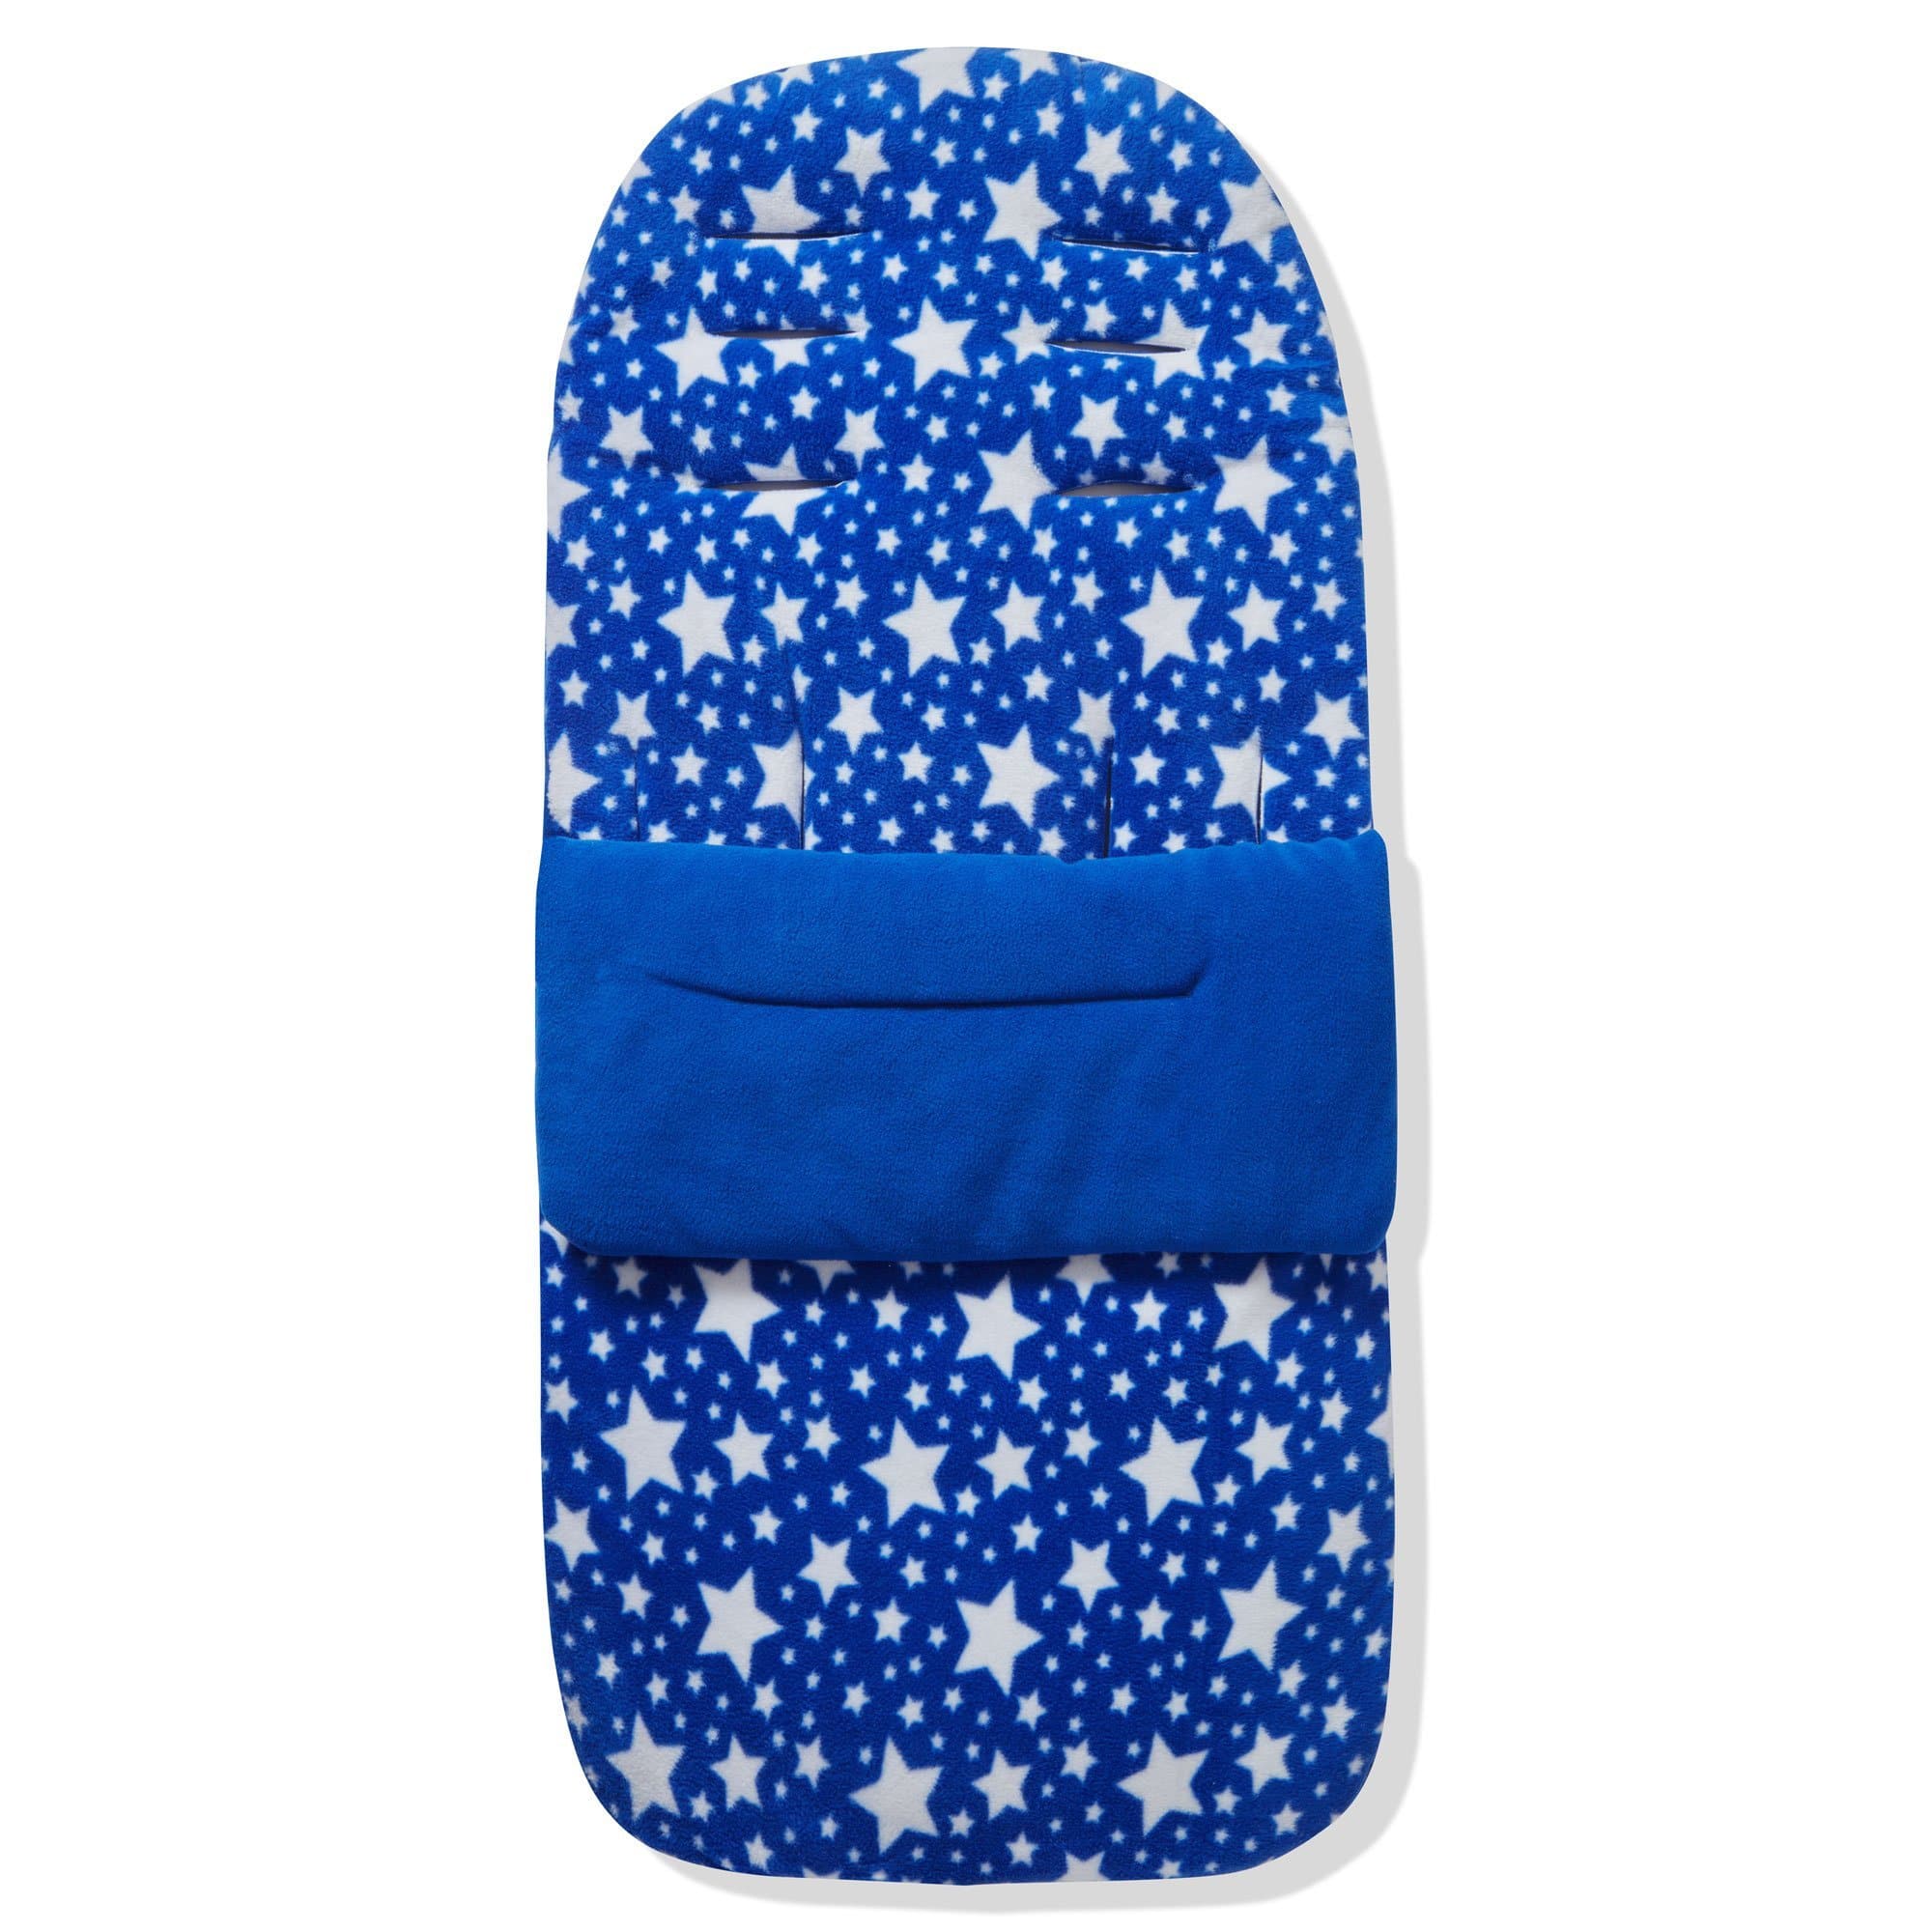 Fleece Footmuff / Cosy Toes Compatible with Little Shield - Blue Star / Fits All Models | For Your Little One